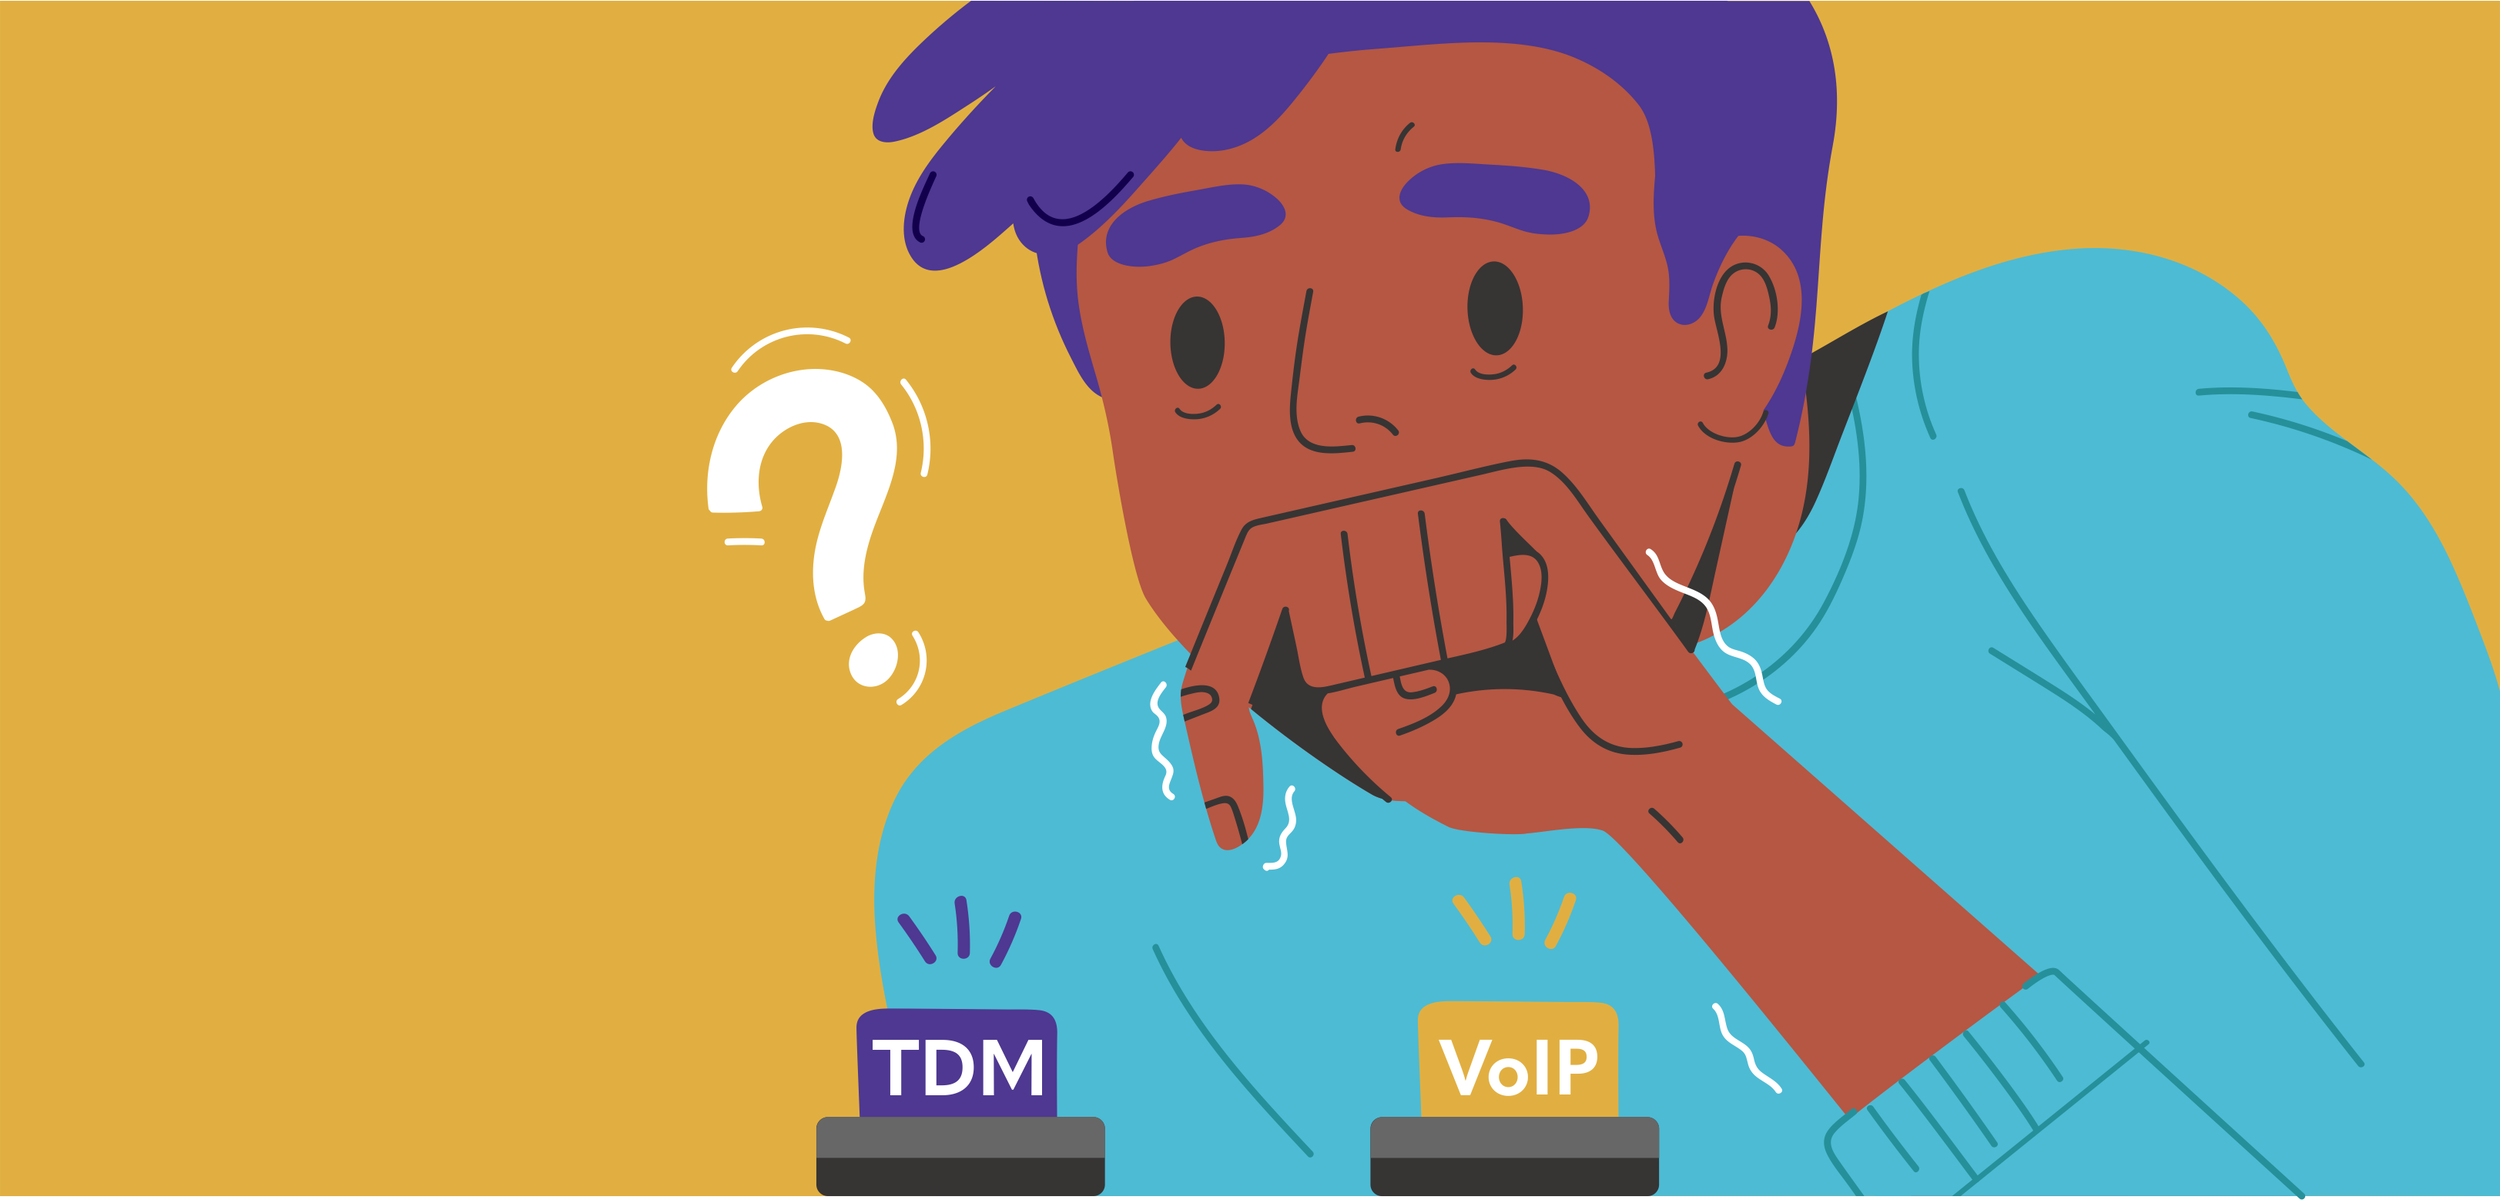 Voip_TDM_Telefonia_Call Center.png